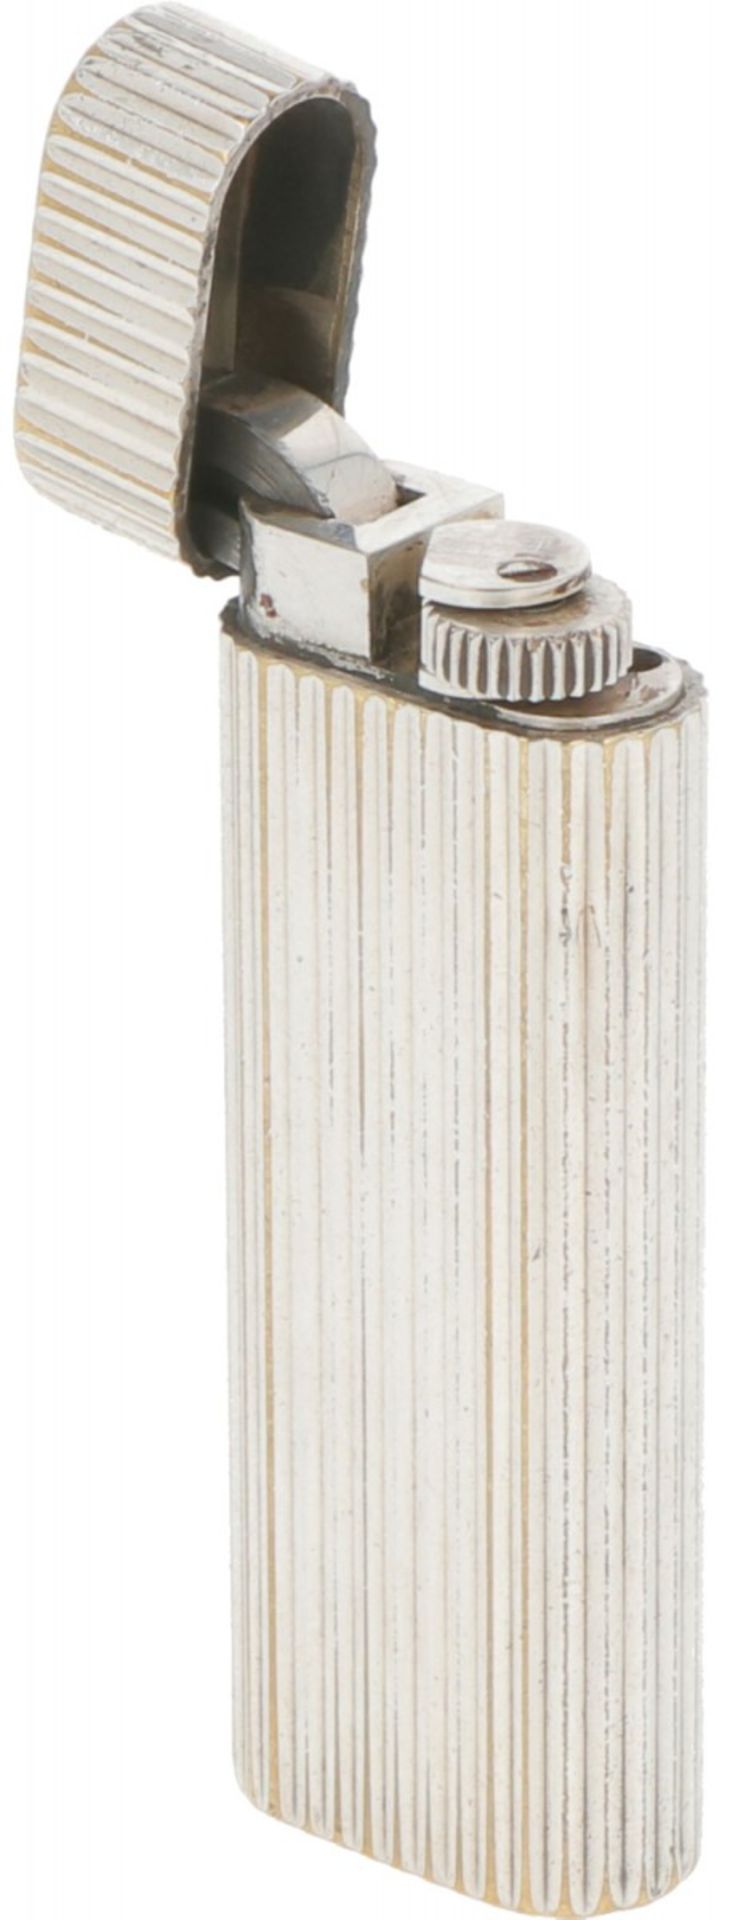 Cartier lighter silver-plated. - Image 2 of 3